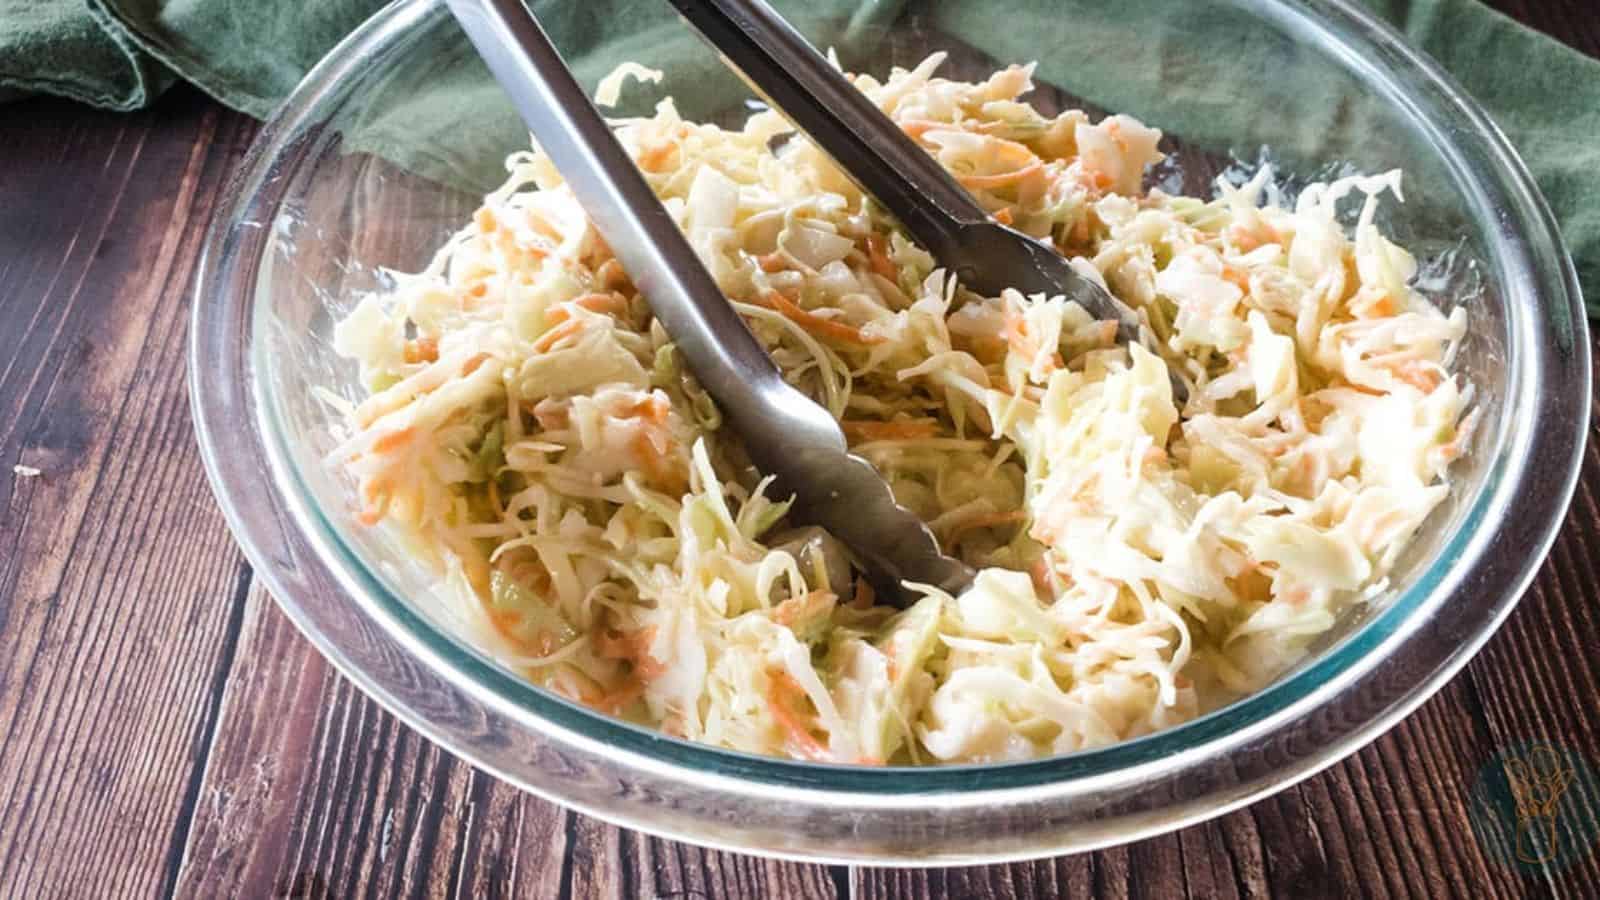 A picture of Popeyes coleslaw copycat recipe in glass bowl.